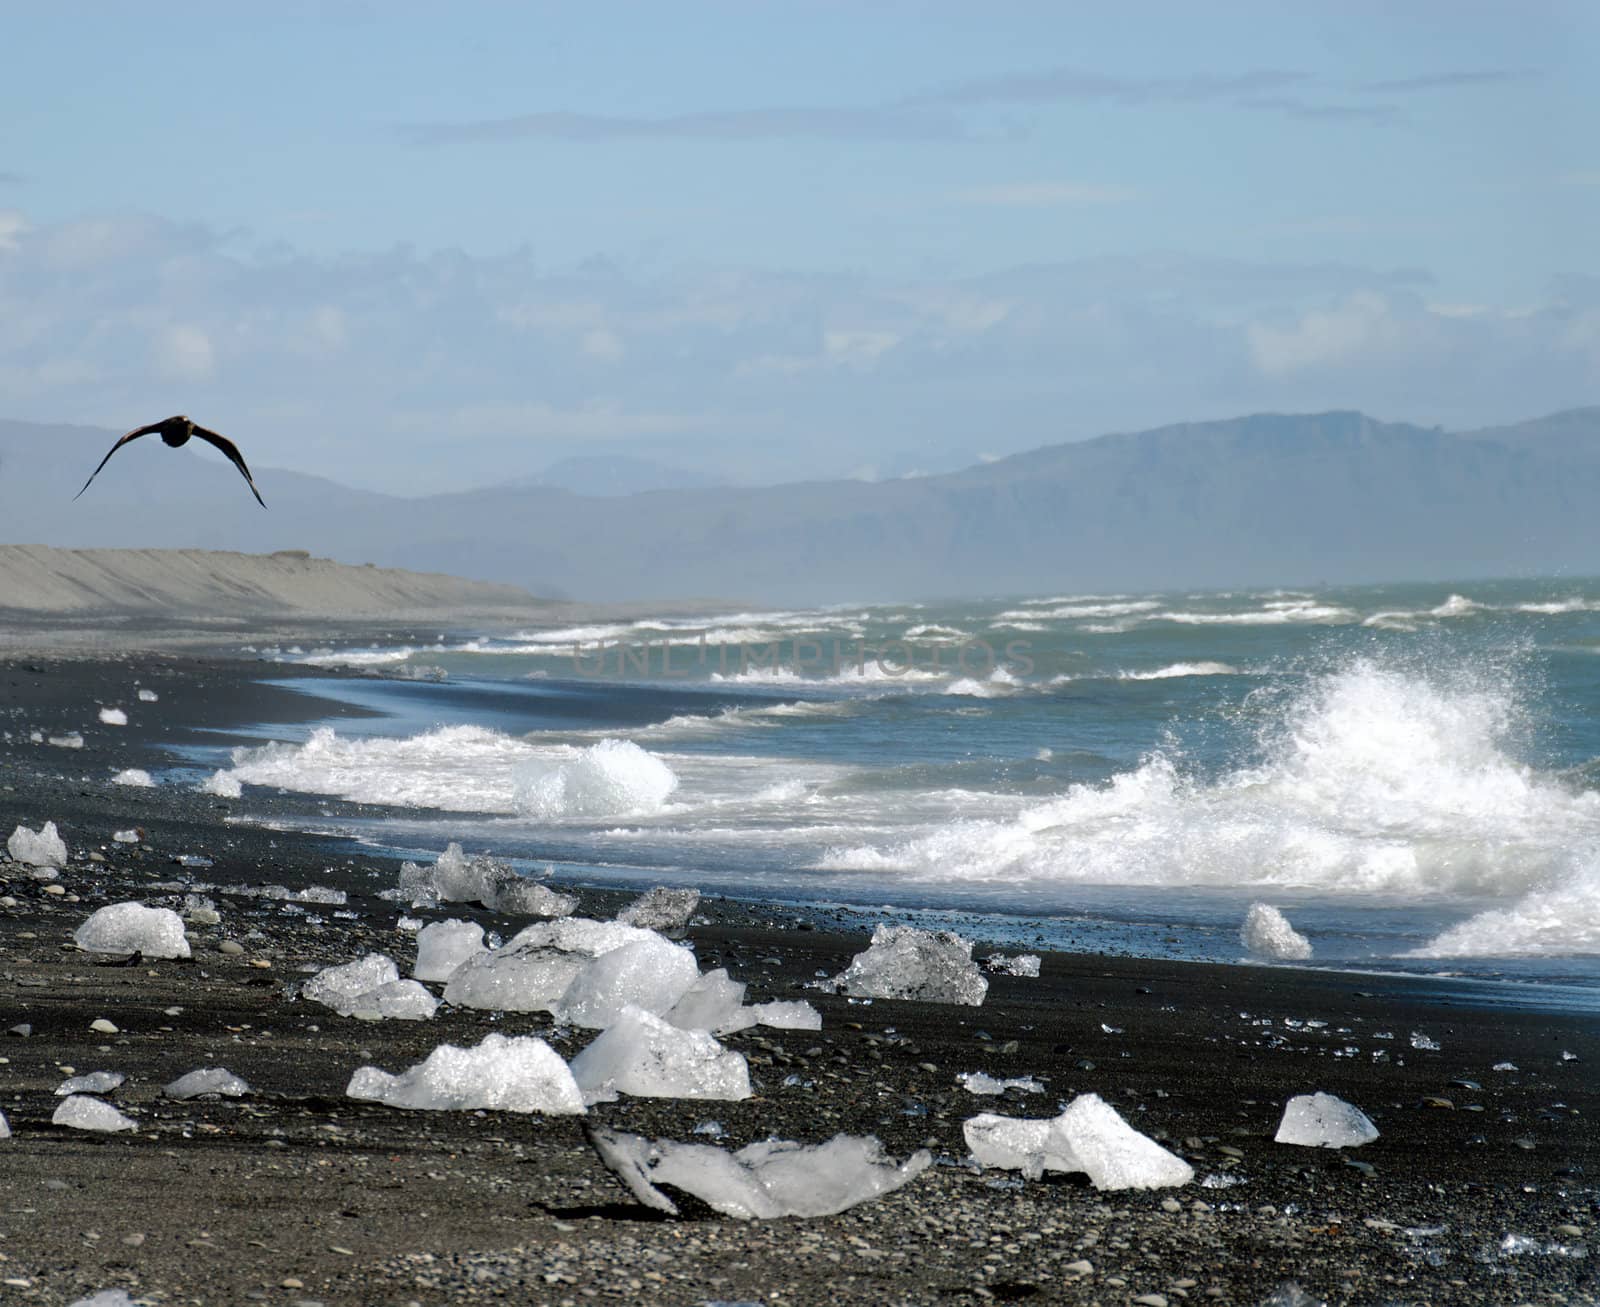  coast scene in Iceland, glacier ice and a flying tern on the beach